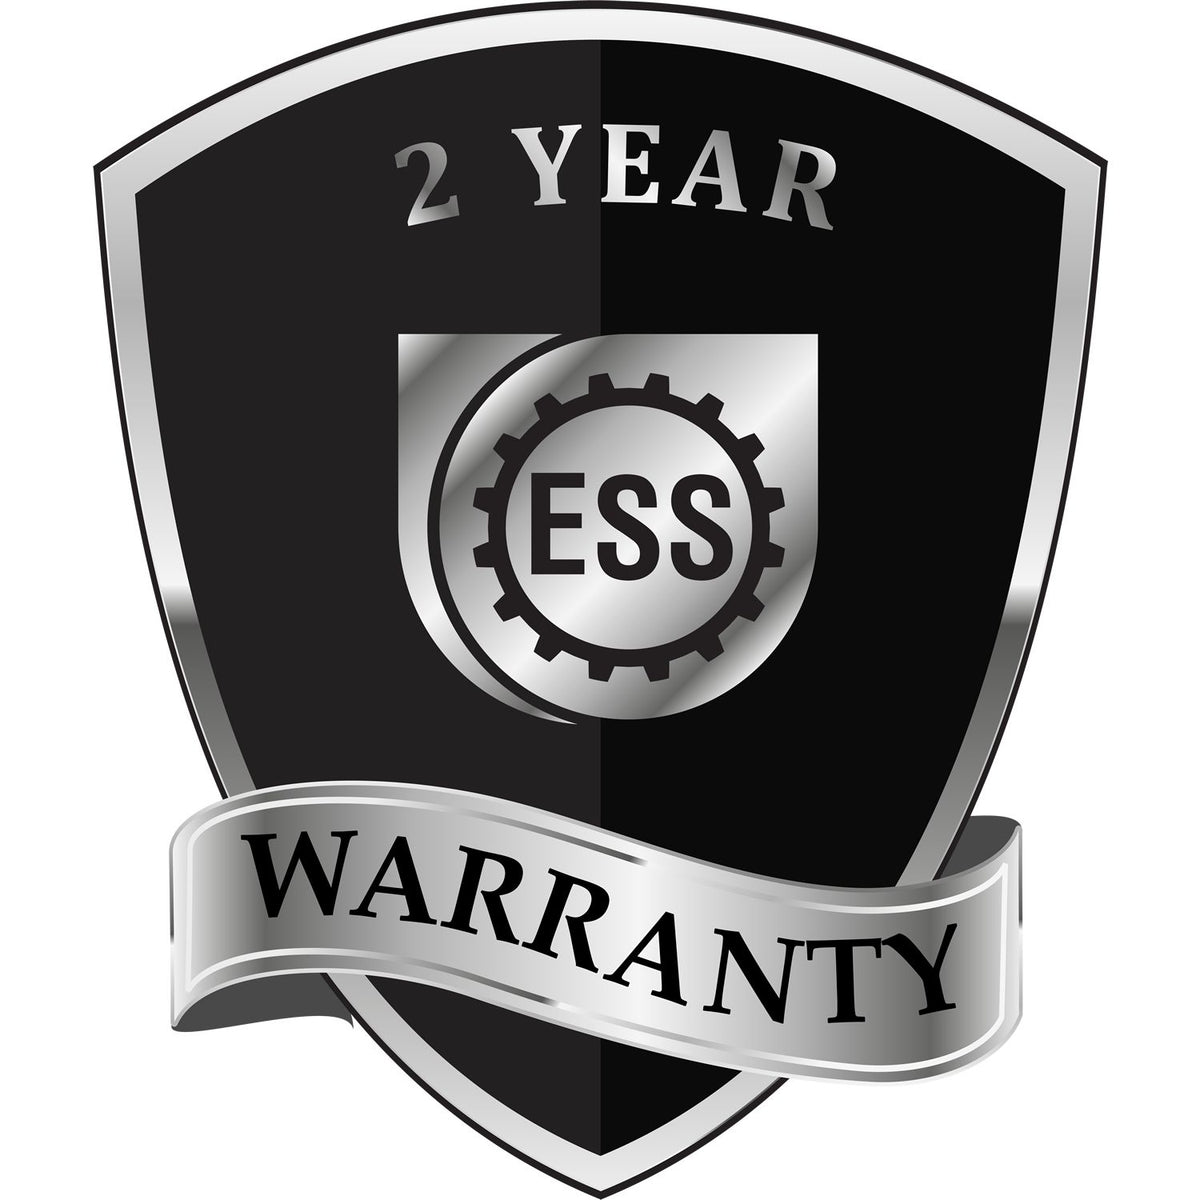 A badge or emblem showing a warranty icon for the Soft Montana Professional Engineer Seal